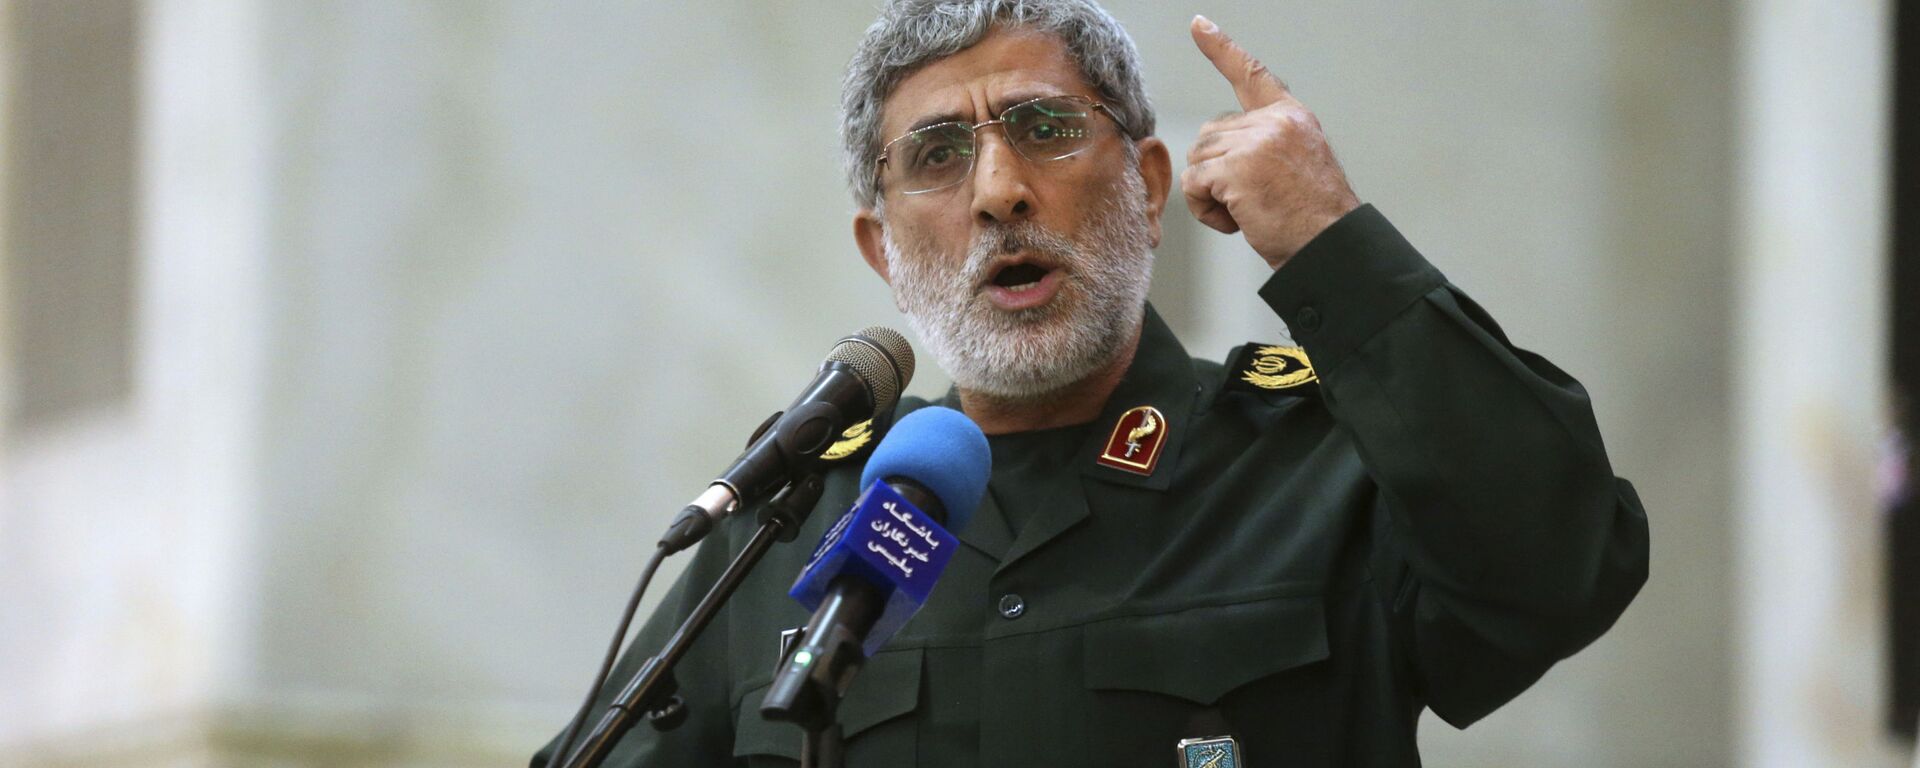 In this May 24, 2017 photo, Gen. Esmail Ghaani speaks in a meeting at the shrine of the late revolutionary founder Ayatollah Khomeini just outside Tehran, Iran. - Sputnik International, 1920, 06.08.2022